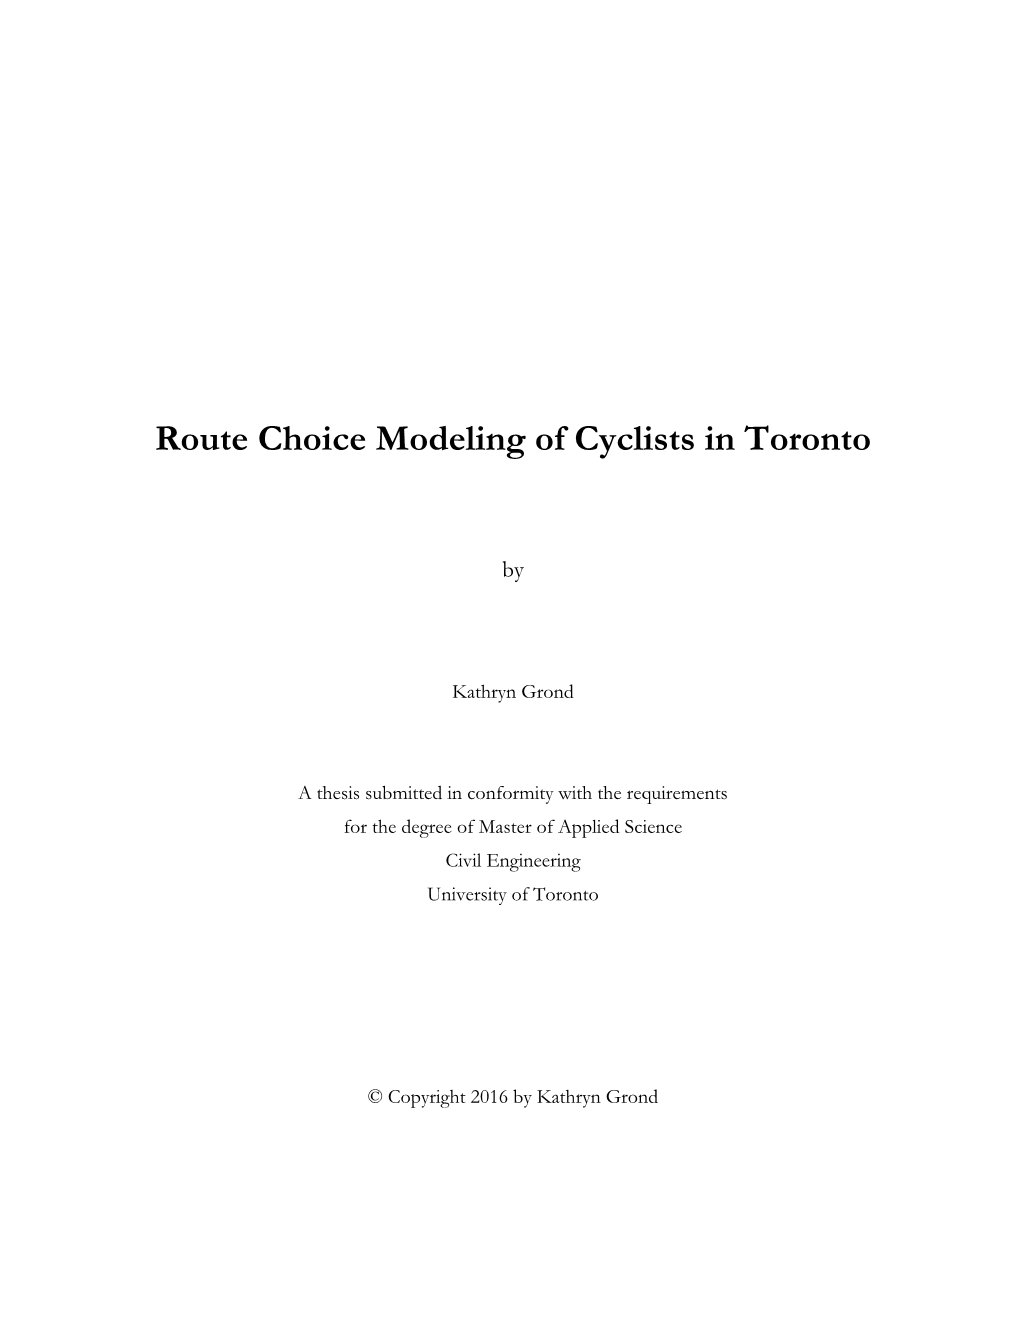 Route Choice Modeling of Cyclists in Toronto